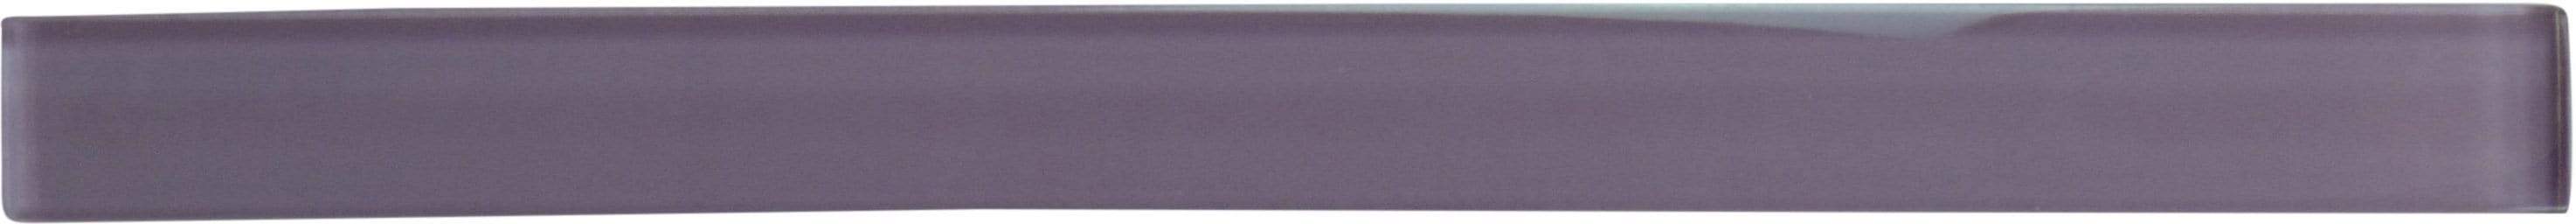 Lilac 1" x 12" Glossy Glass Liner Tuscan Glass